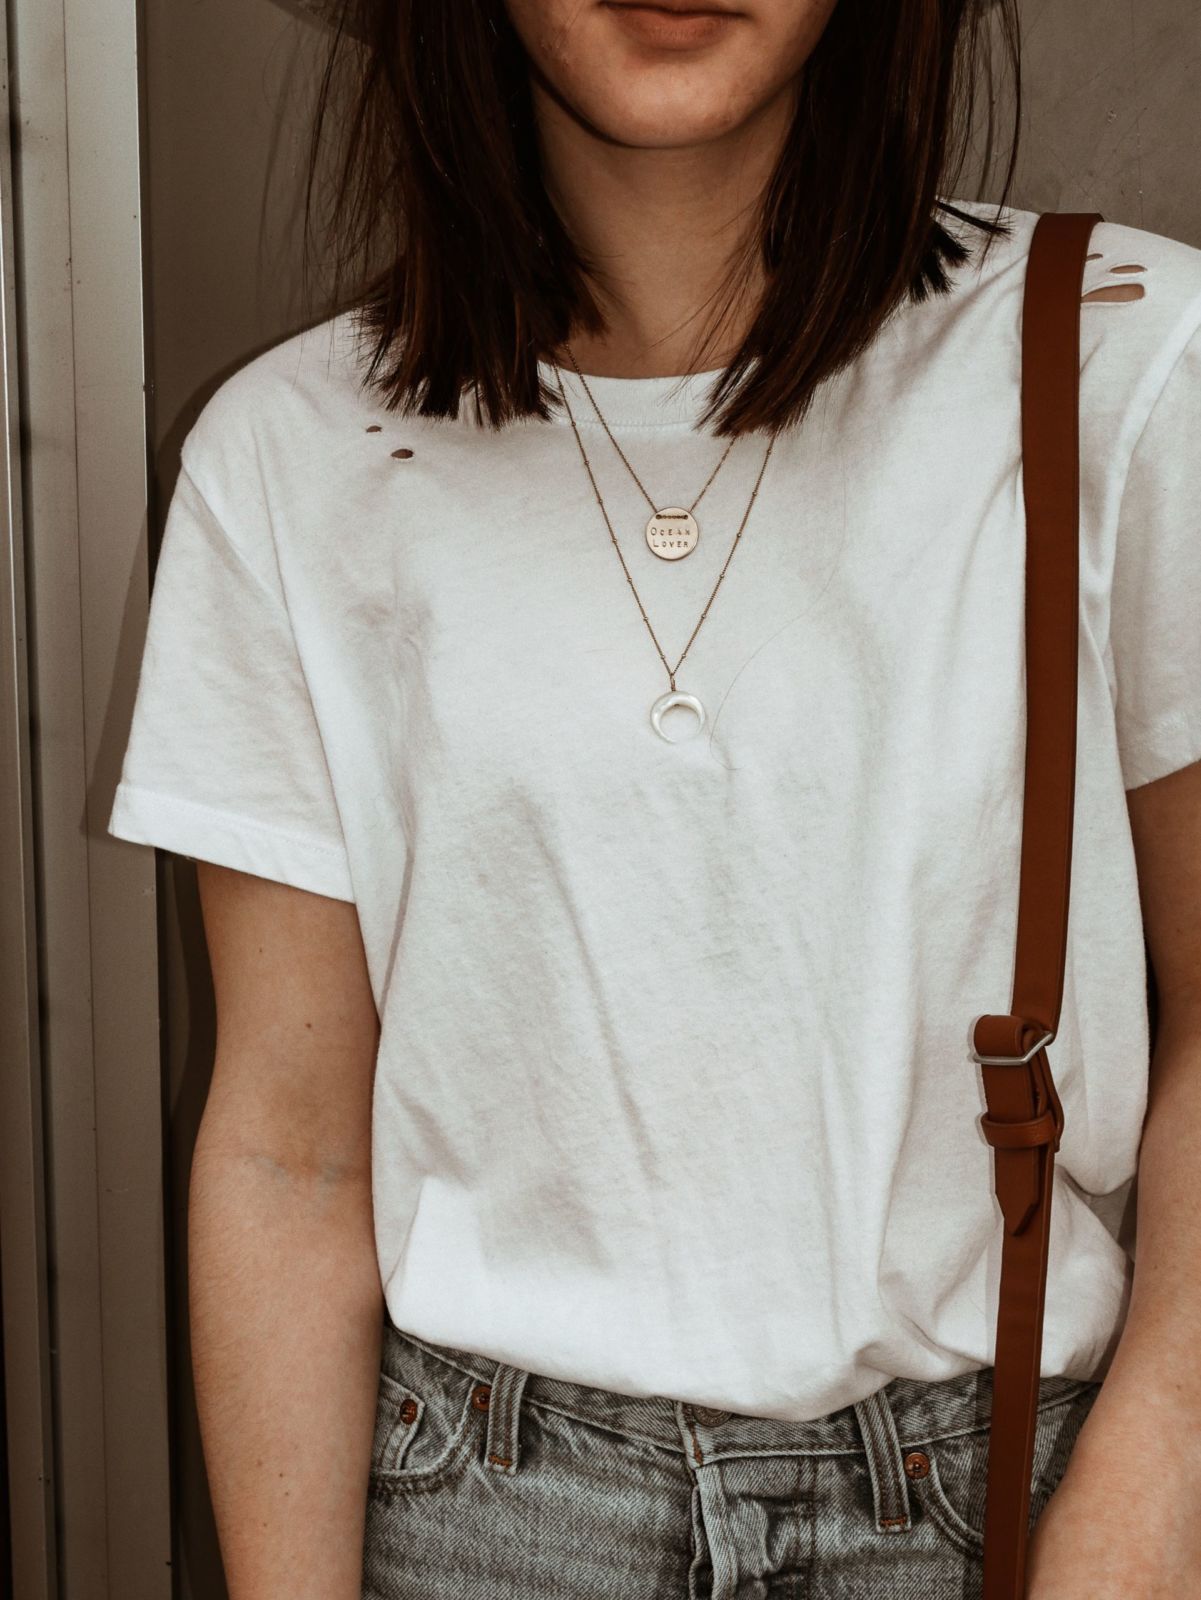 white t shirt outfit